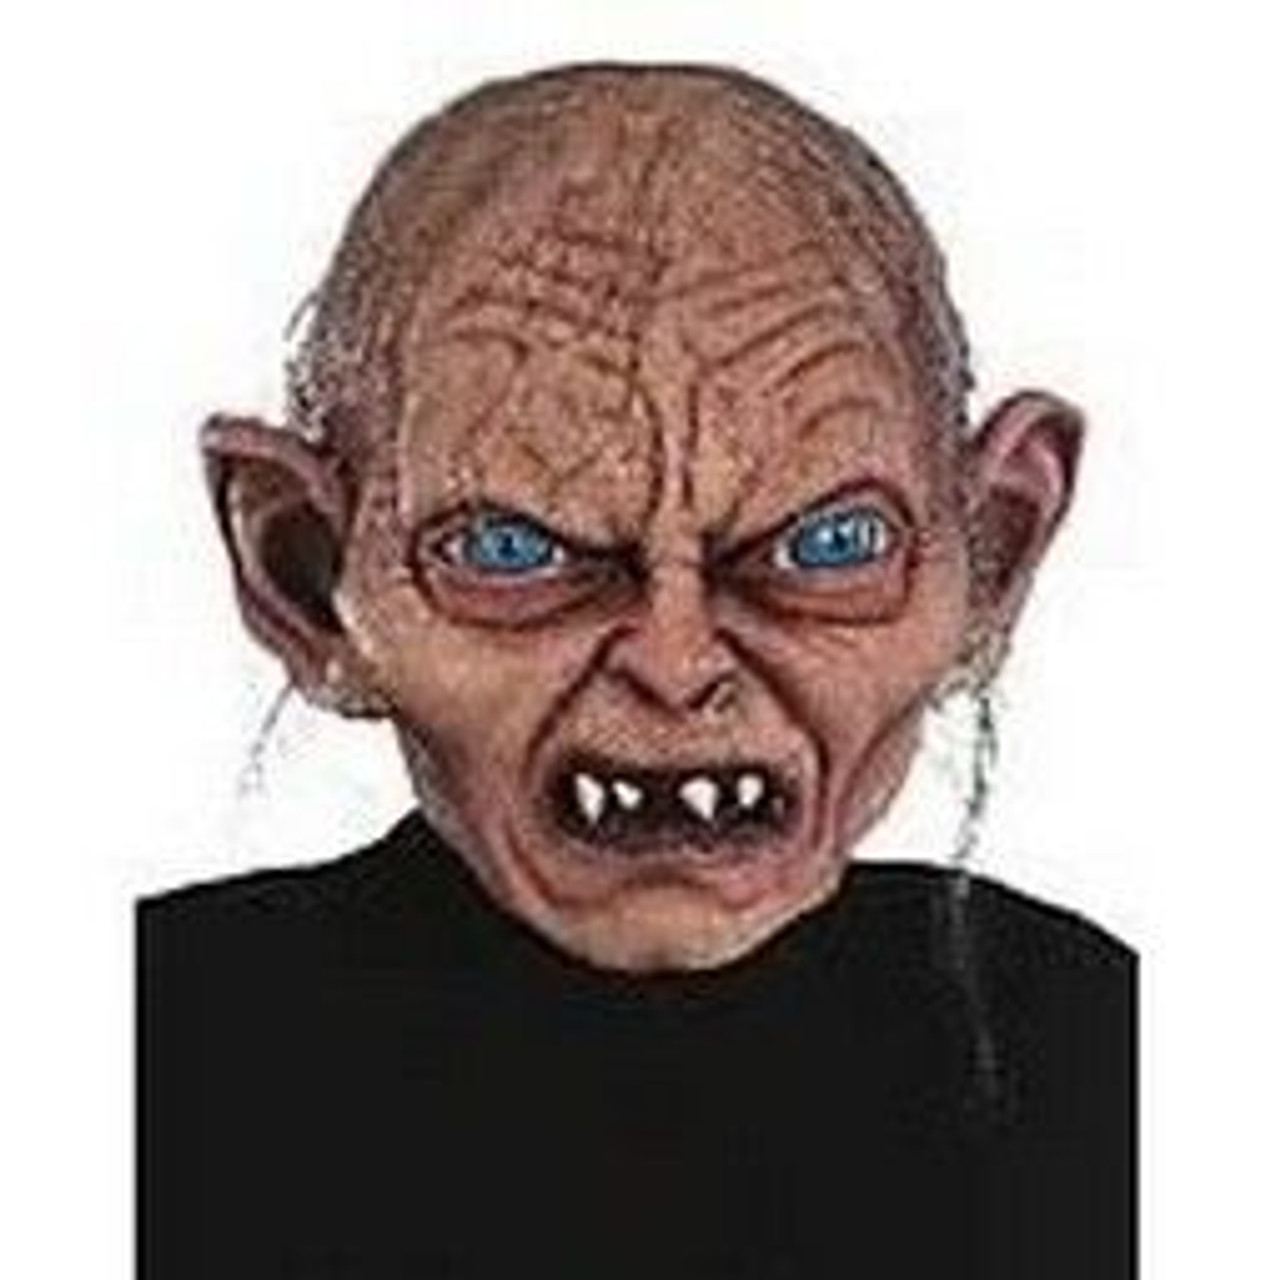 Adult Gollum Lord Of The Rings Mask